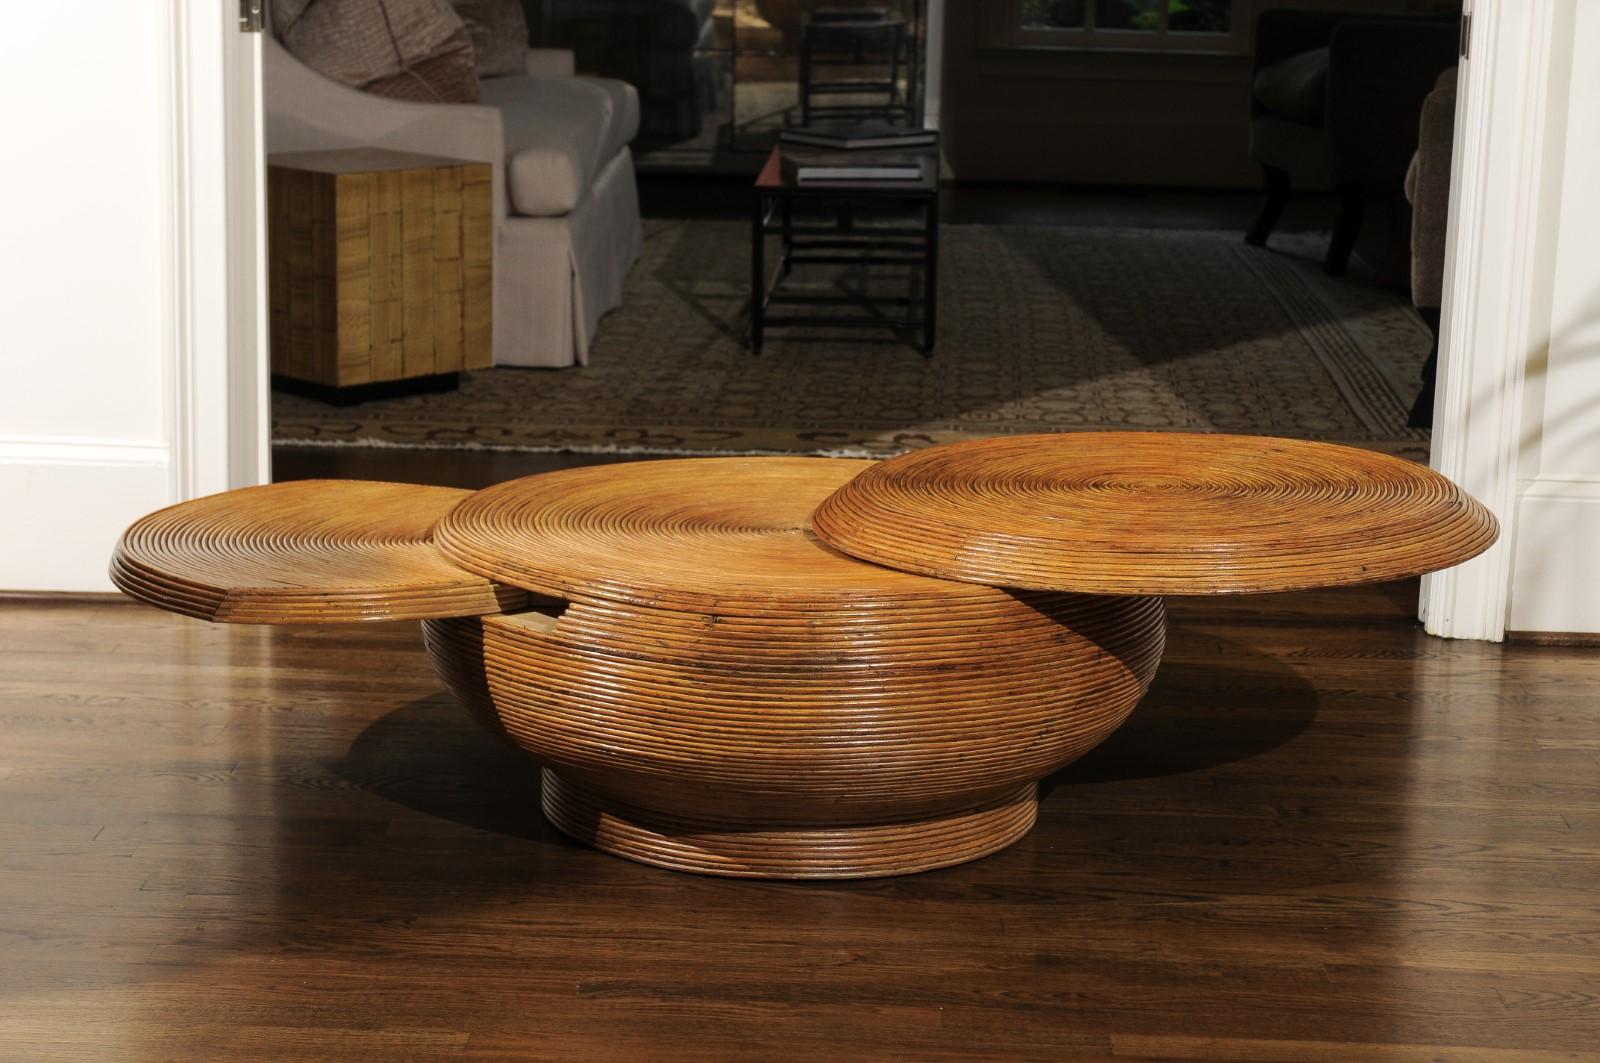 A stunning restored vintage coffee table, circa 1975. Lovely expertly crafted mahogany form painstakingly veneered in thin reed style bamboo. The tabletop and hidden shelf extended to expand the table surface area. A fabulous piece of organic